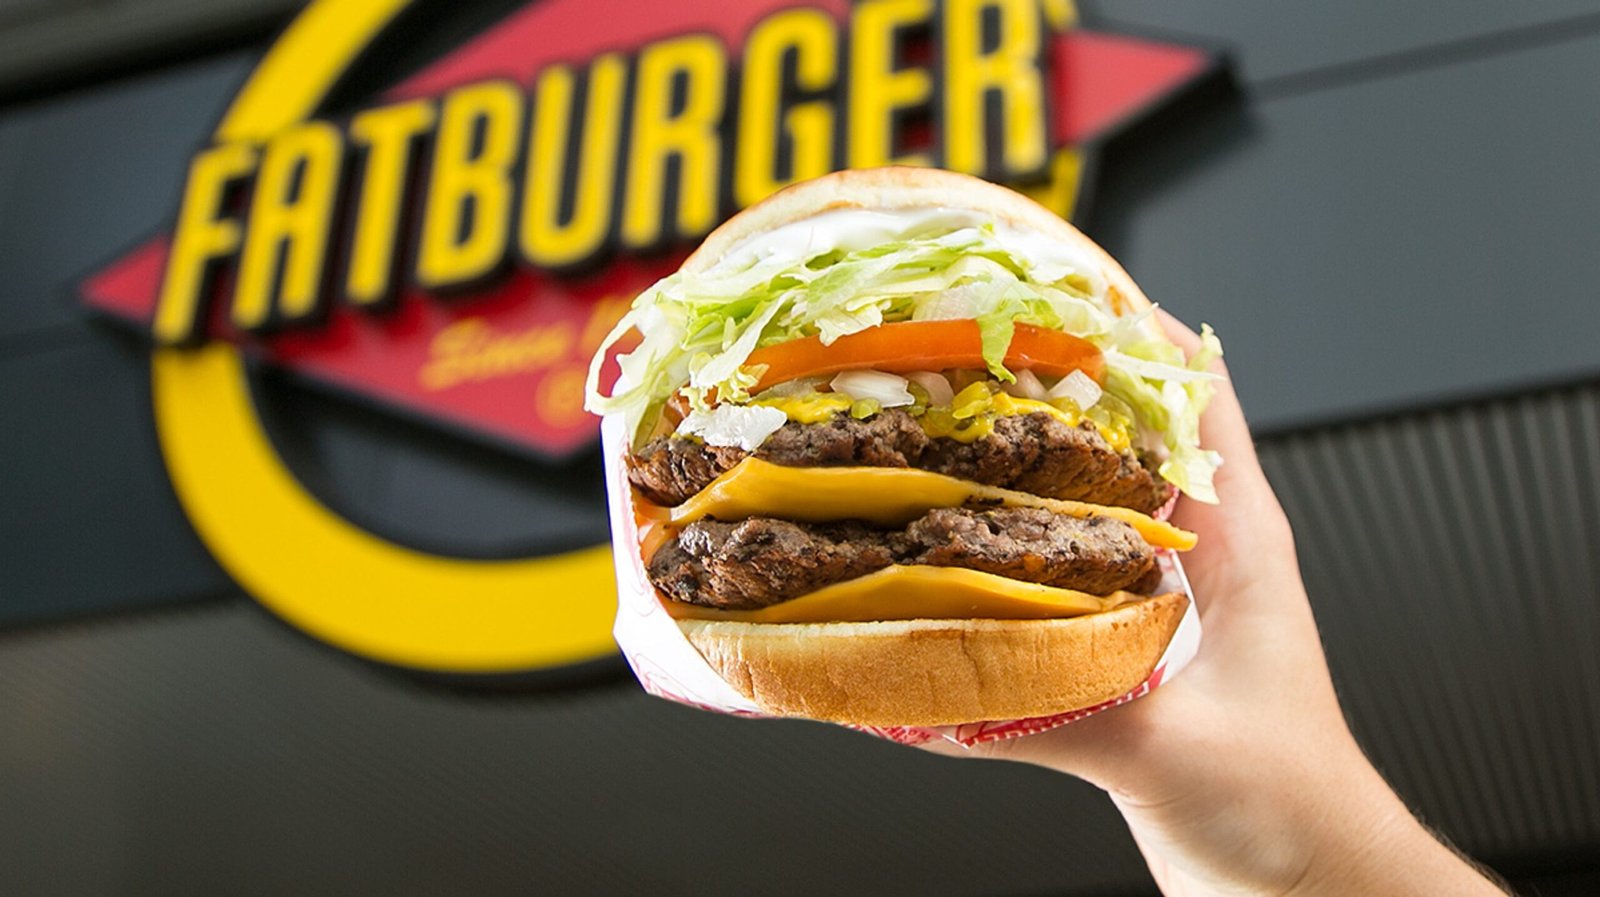 Fatburger | Franchise Cost – How to get, Contact, Apply, Fee